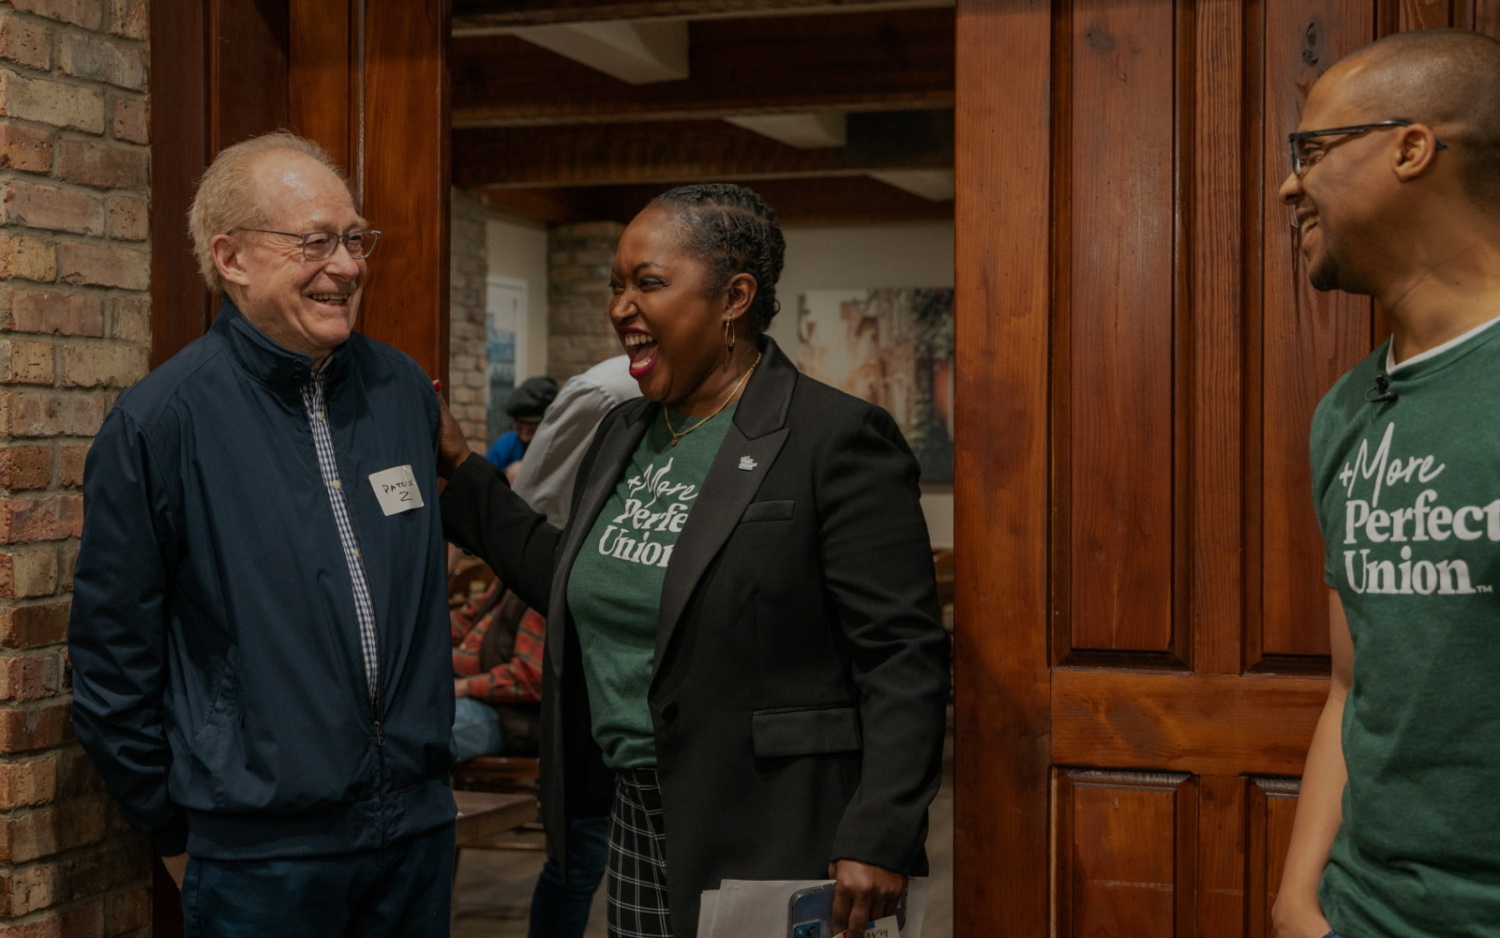 Black, woman Brickyard director and military veteran of +MPU, Mary Tobin places her hand while laughing joyfully on an older gentleman. They appear to be coming out of wood-stained doors with a bustling event happening behind them. Off to the side is Brickyard leader, Archie Nettles, who matches Mary in a green +MPU shirt and is seen smiling in their direction.